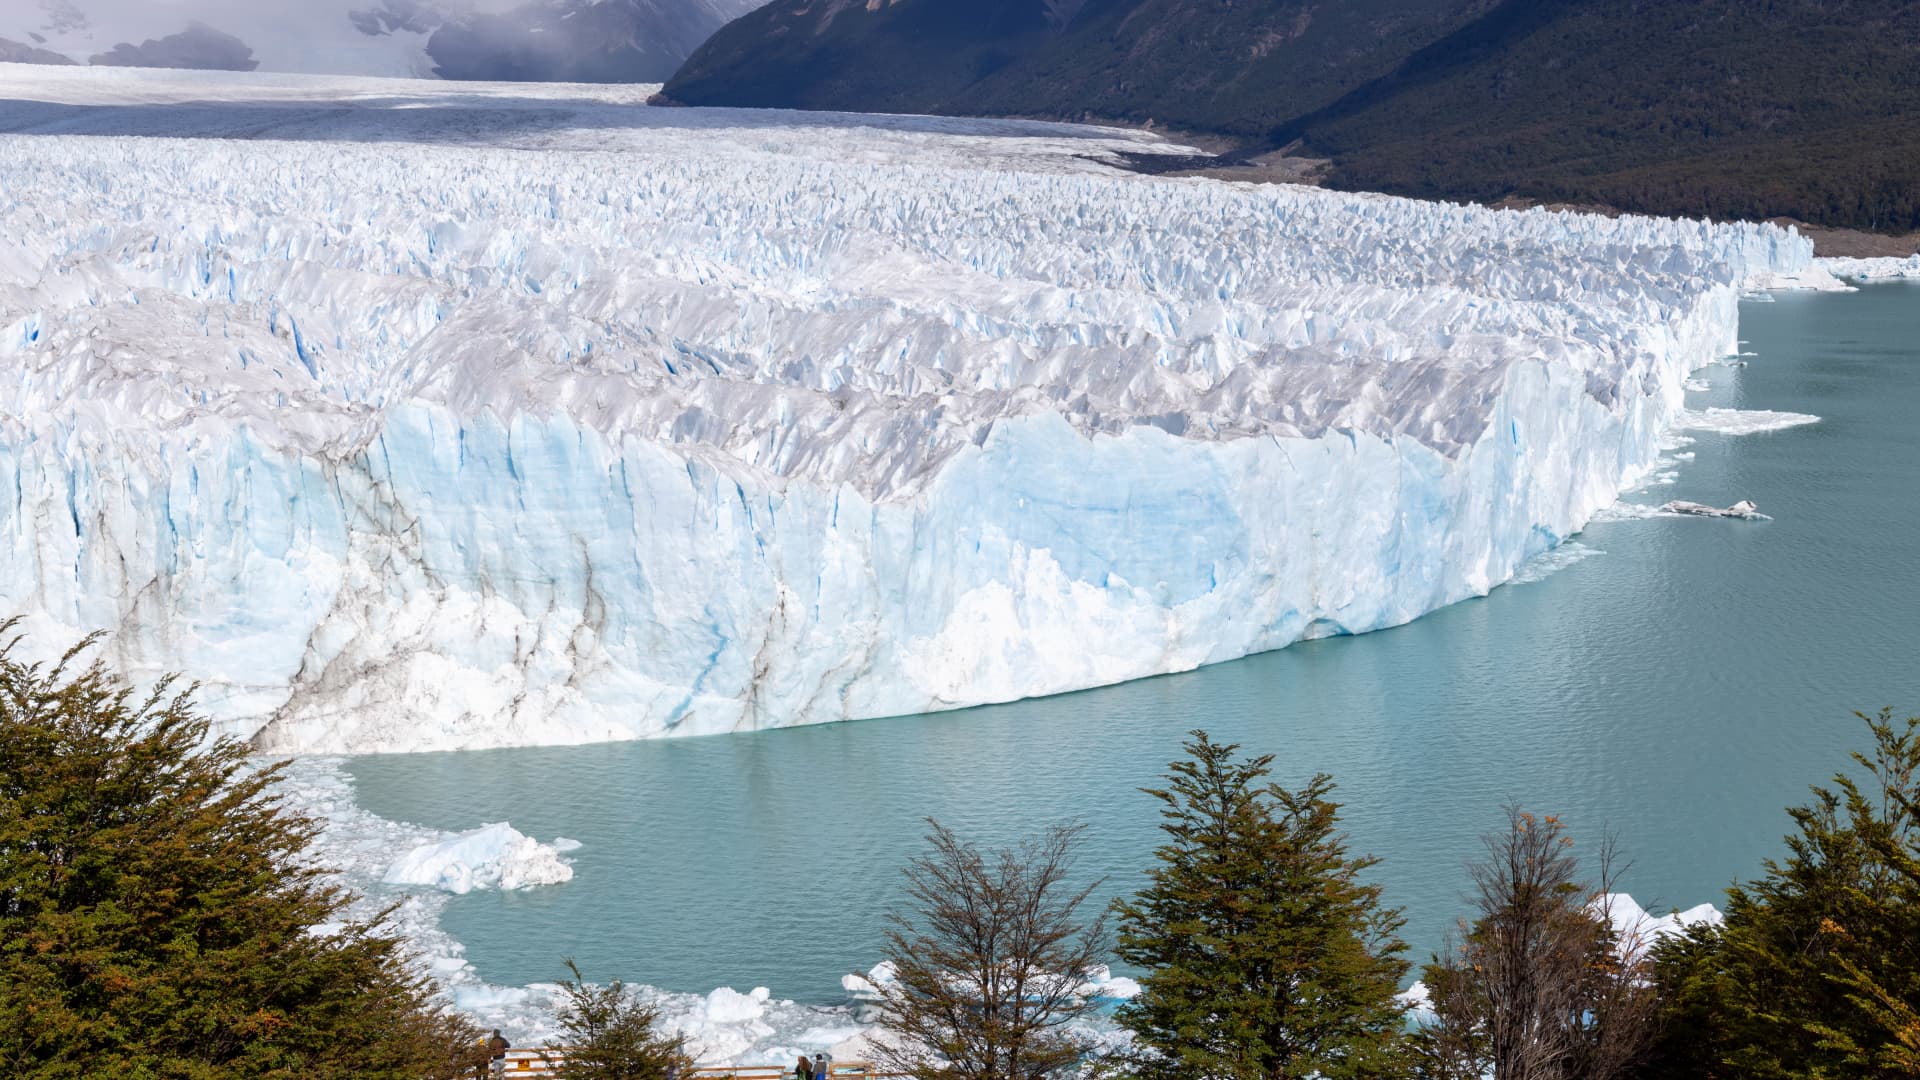 Glaciar Perito Moreno. The glacier, part of the Southern Patagonian Ice Field, is in Argentina's Santa Cruz Province in the southwest.